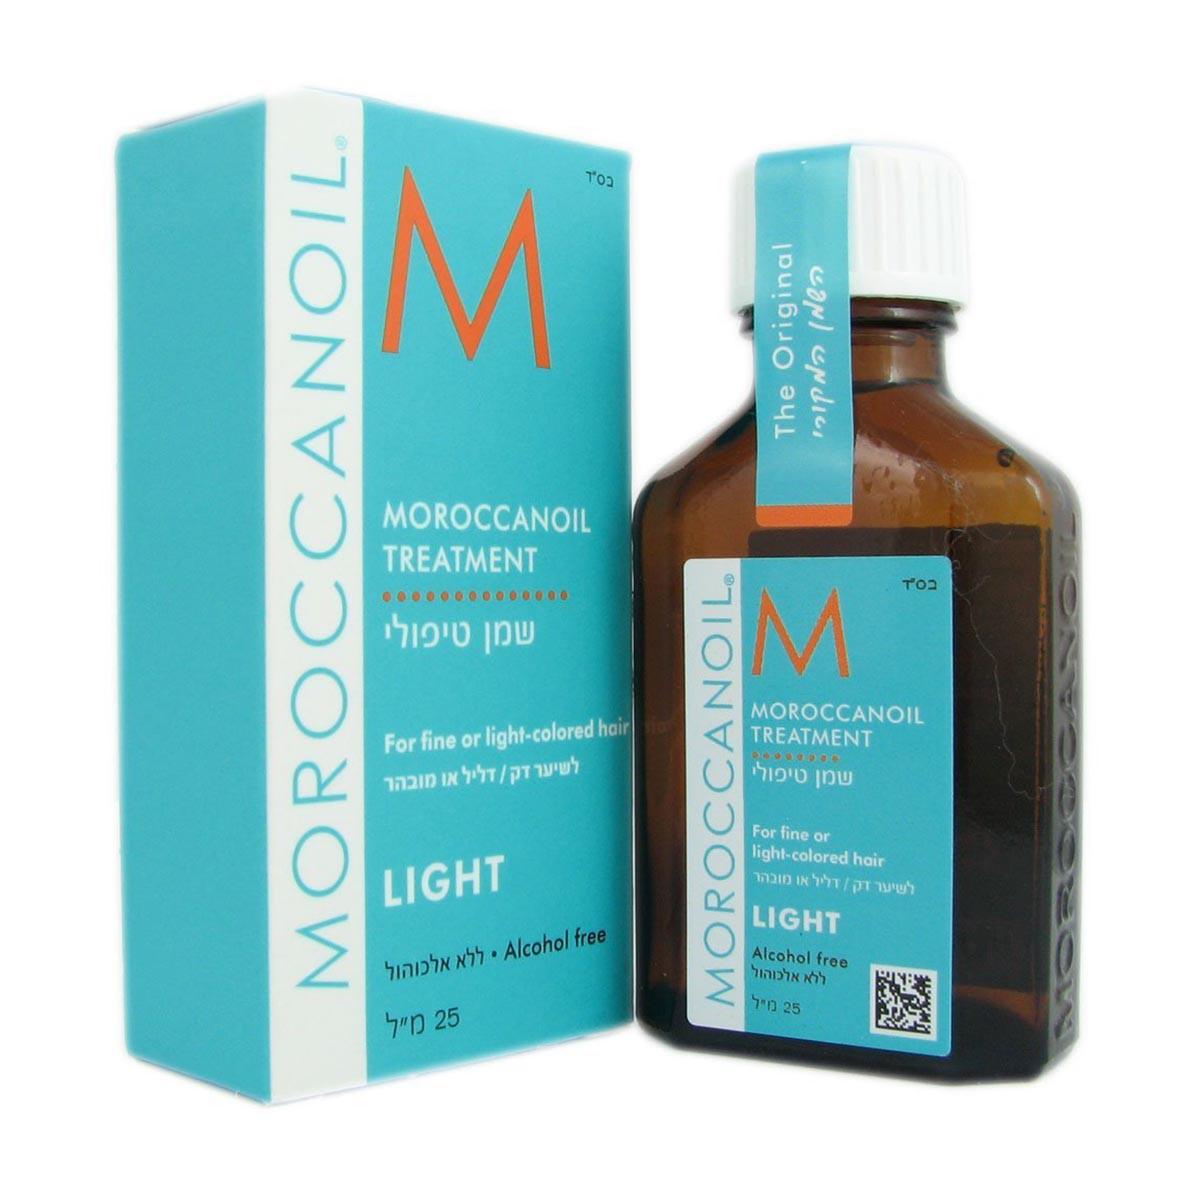 moroccanoil-tintura-para-cabelo-treatment-light-for-fine-or-light-colored-hair-25ml